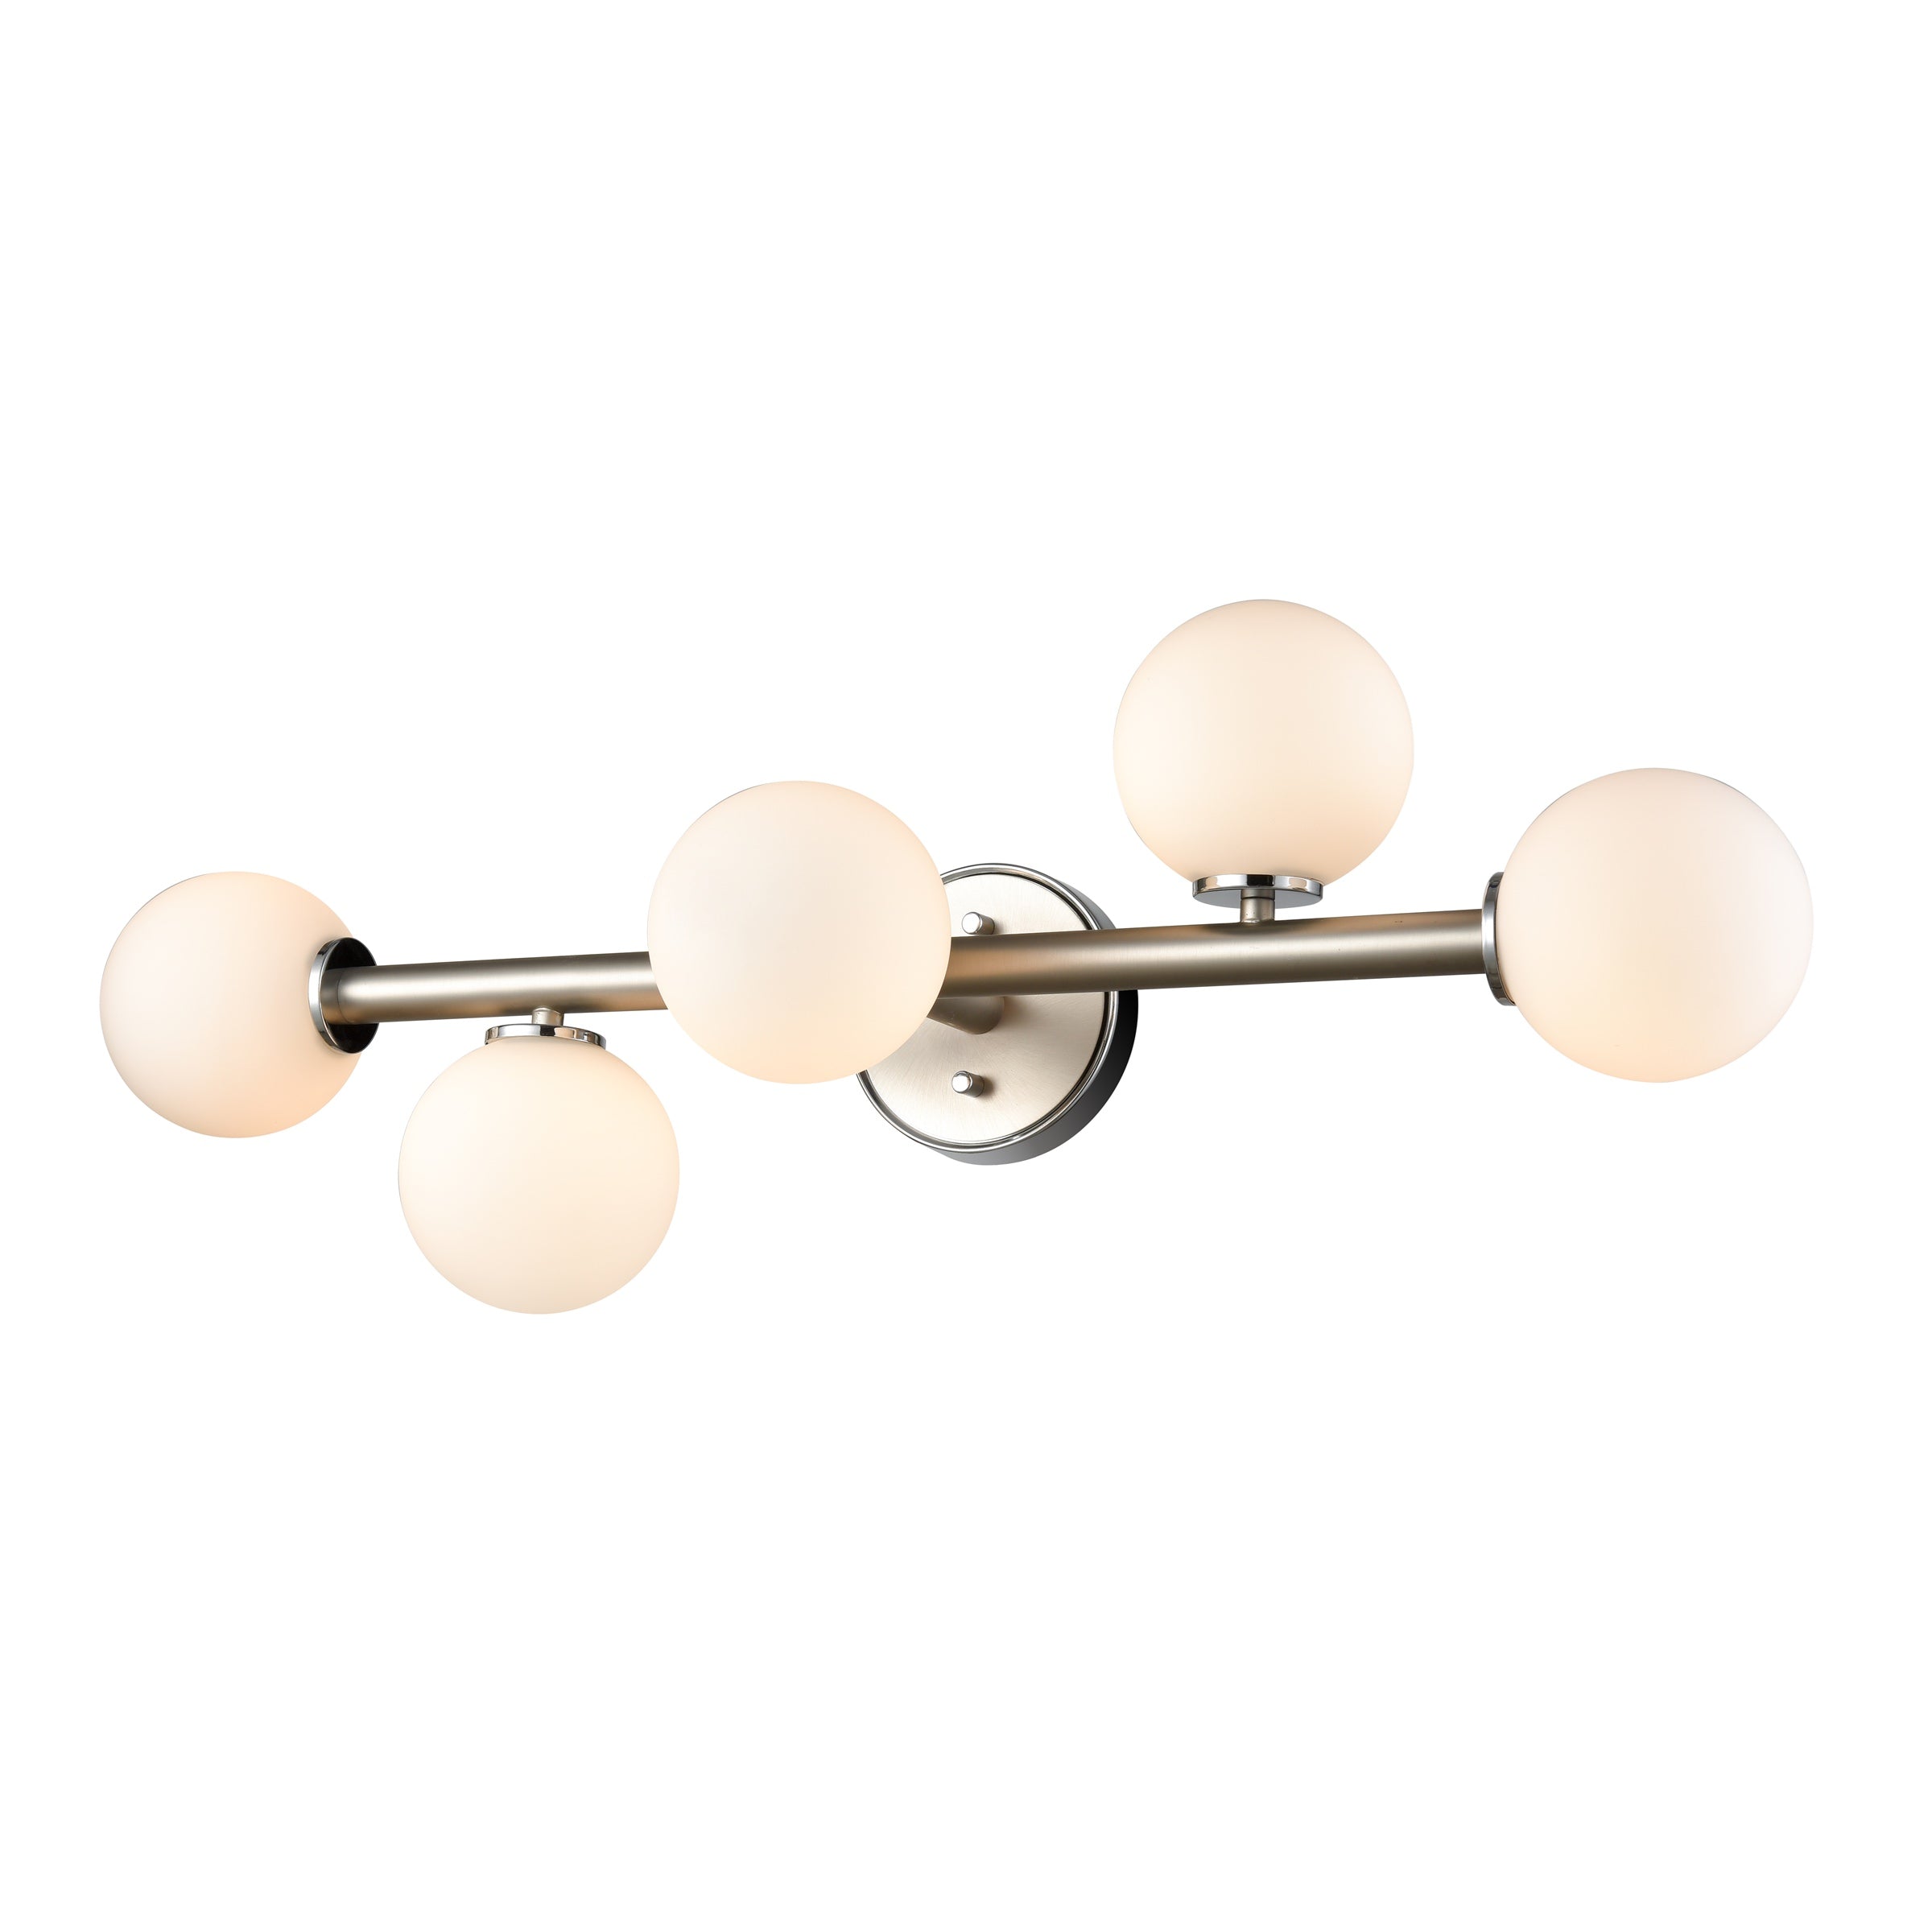 Alouette Vanity Light Chrome and Buffed Nickel with Half Opal Glass